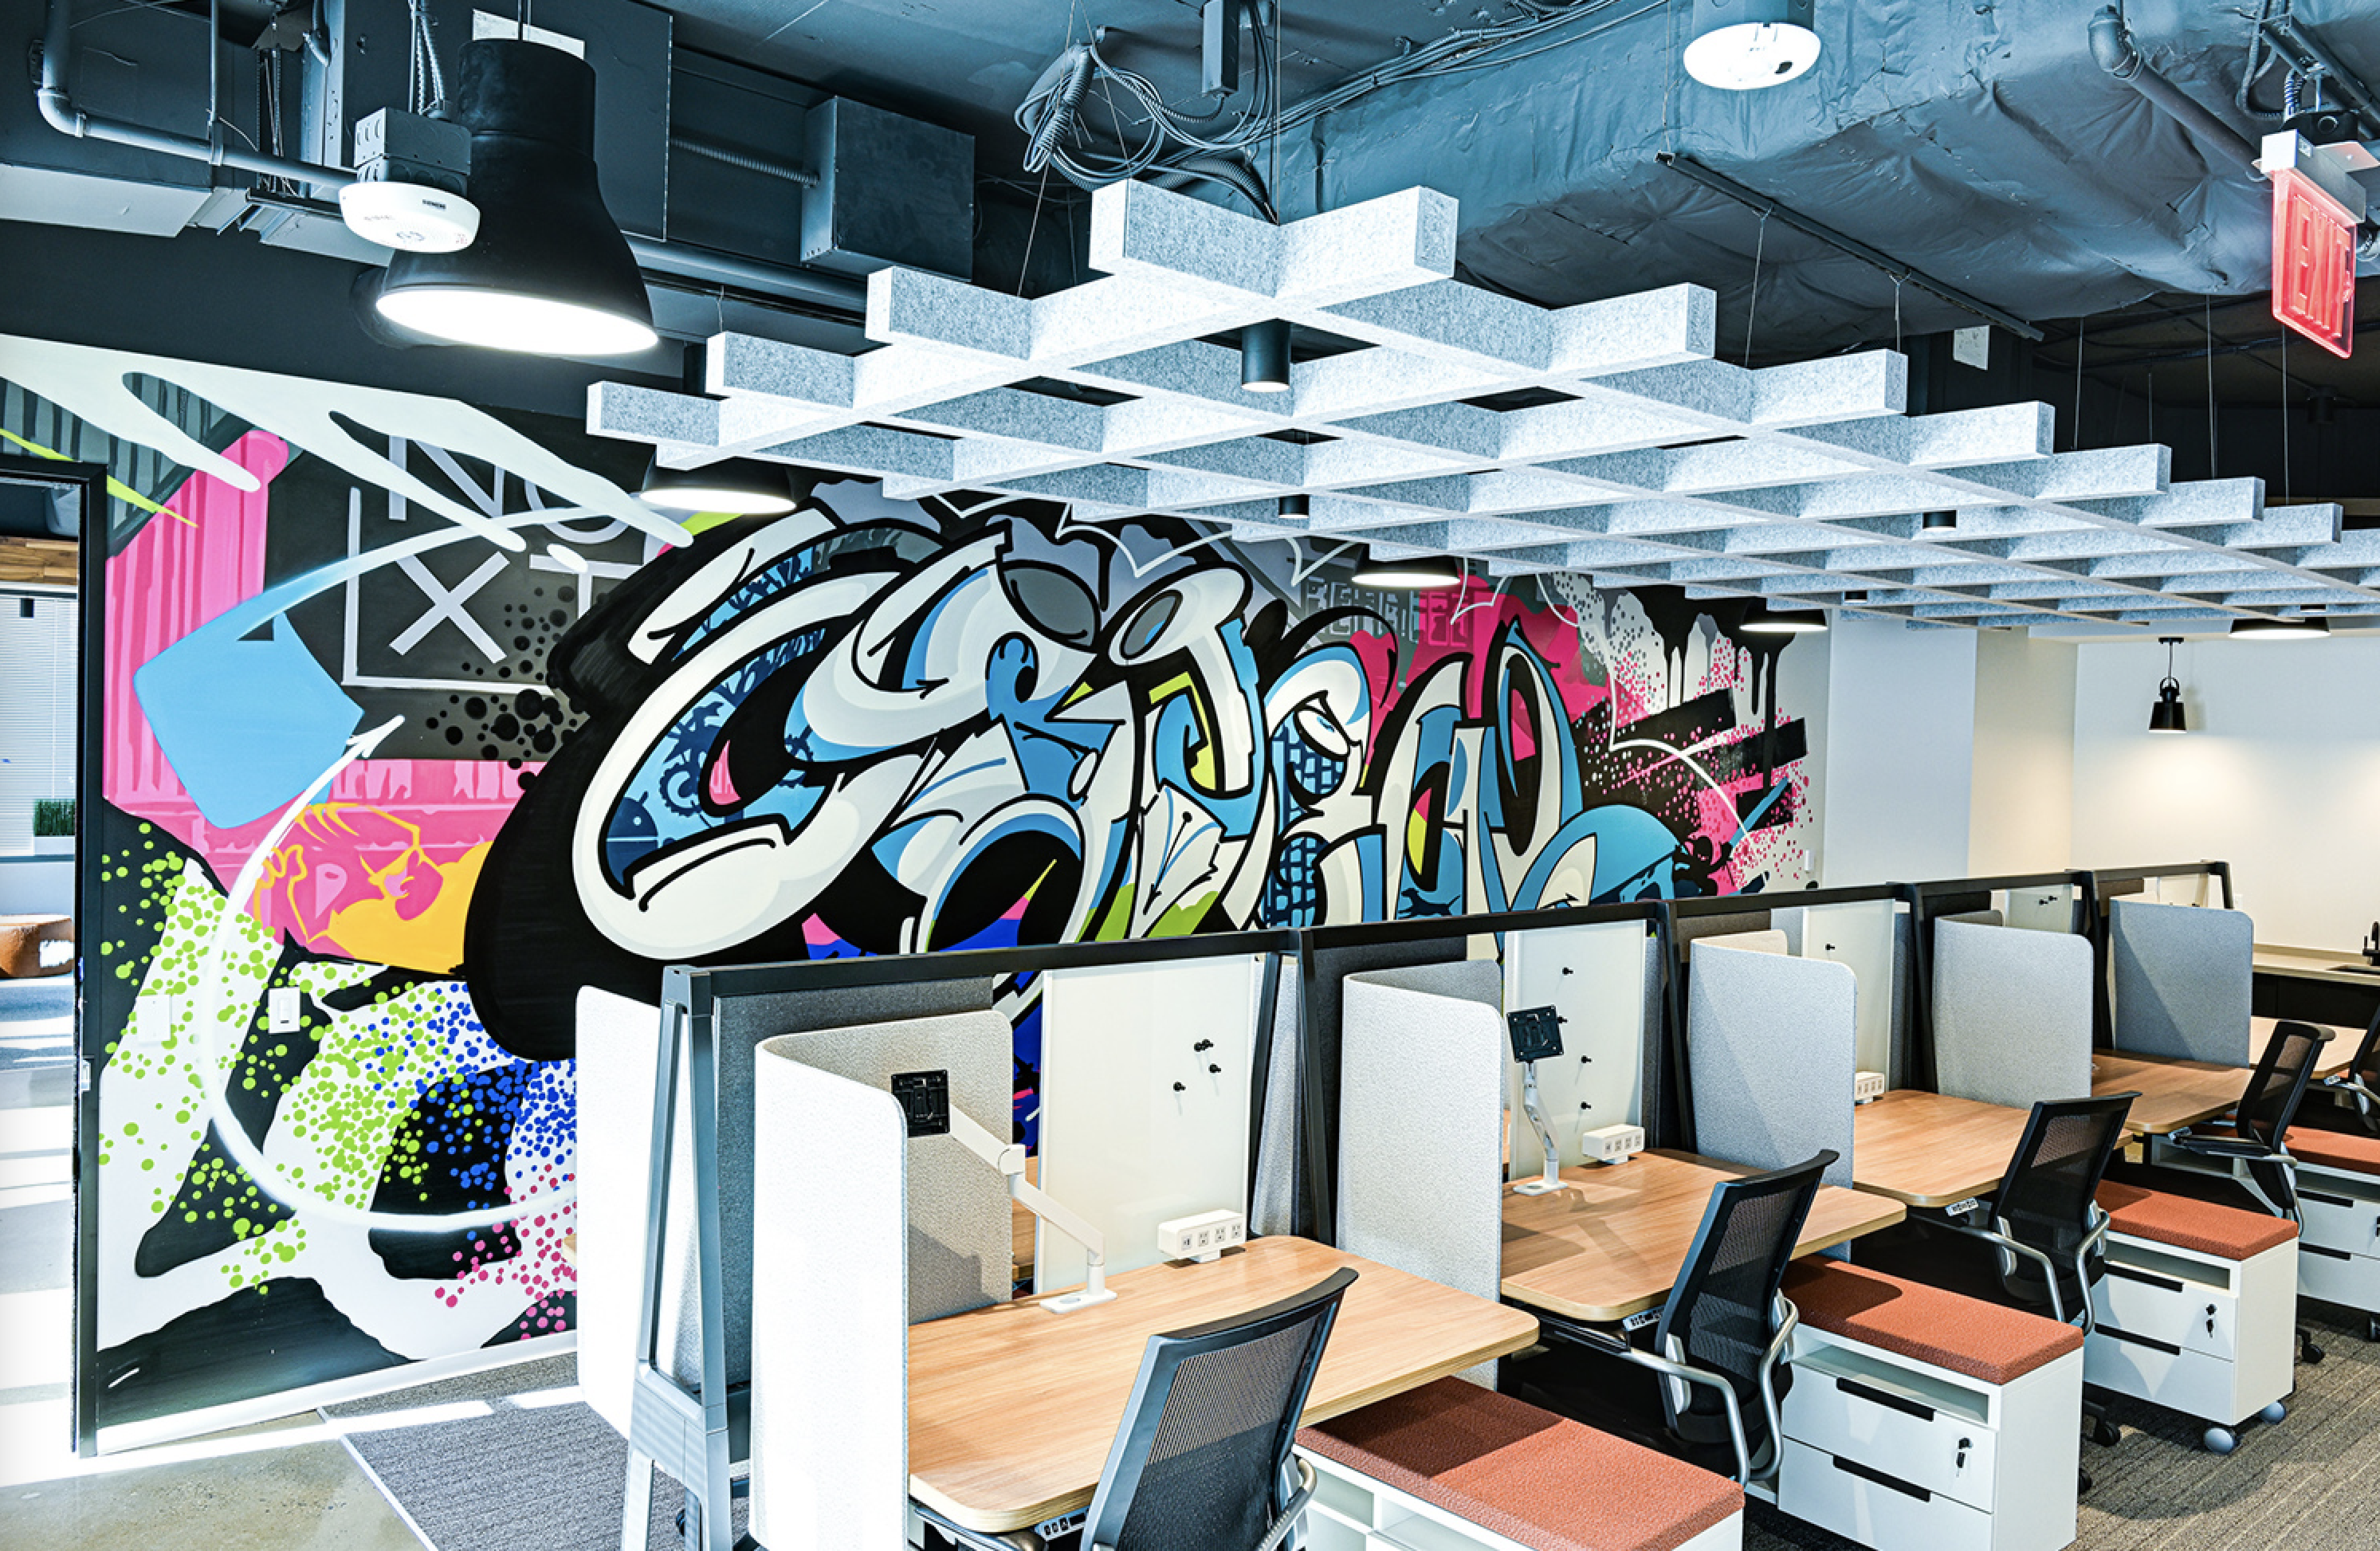 Modern office space with colorful graffiti art on the walls and acoustic panels on the ceiling.